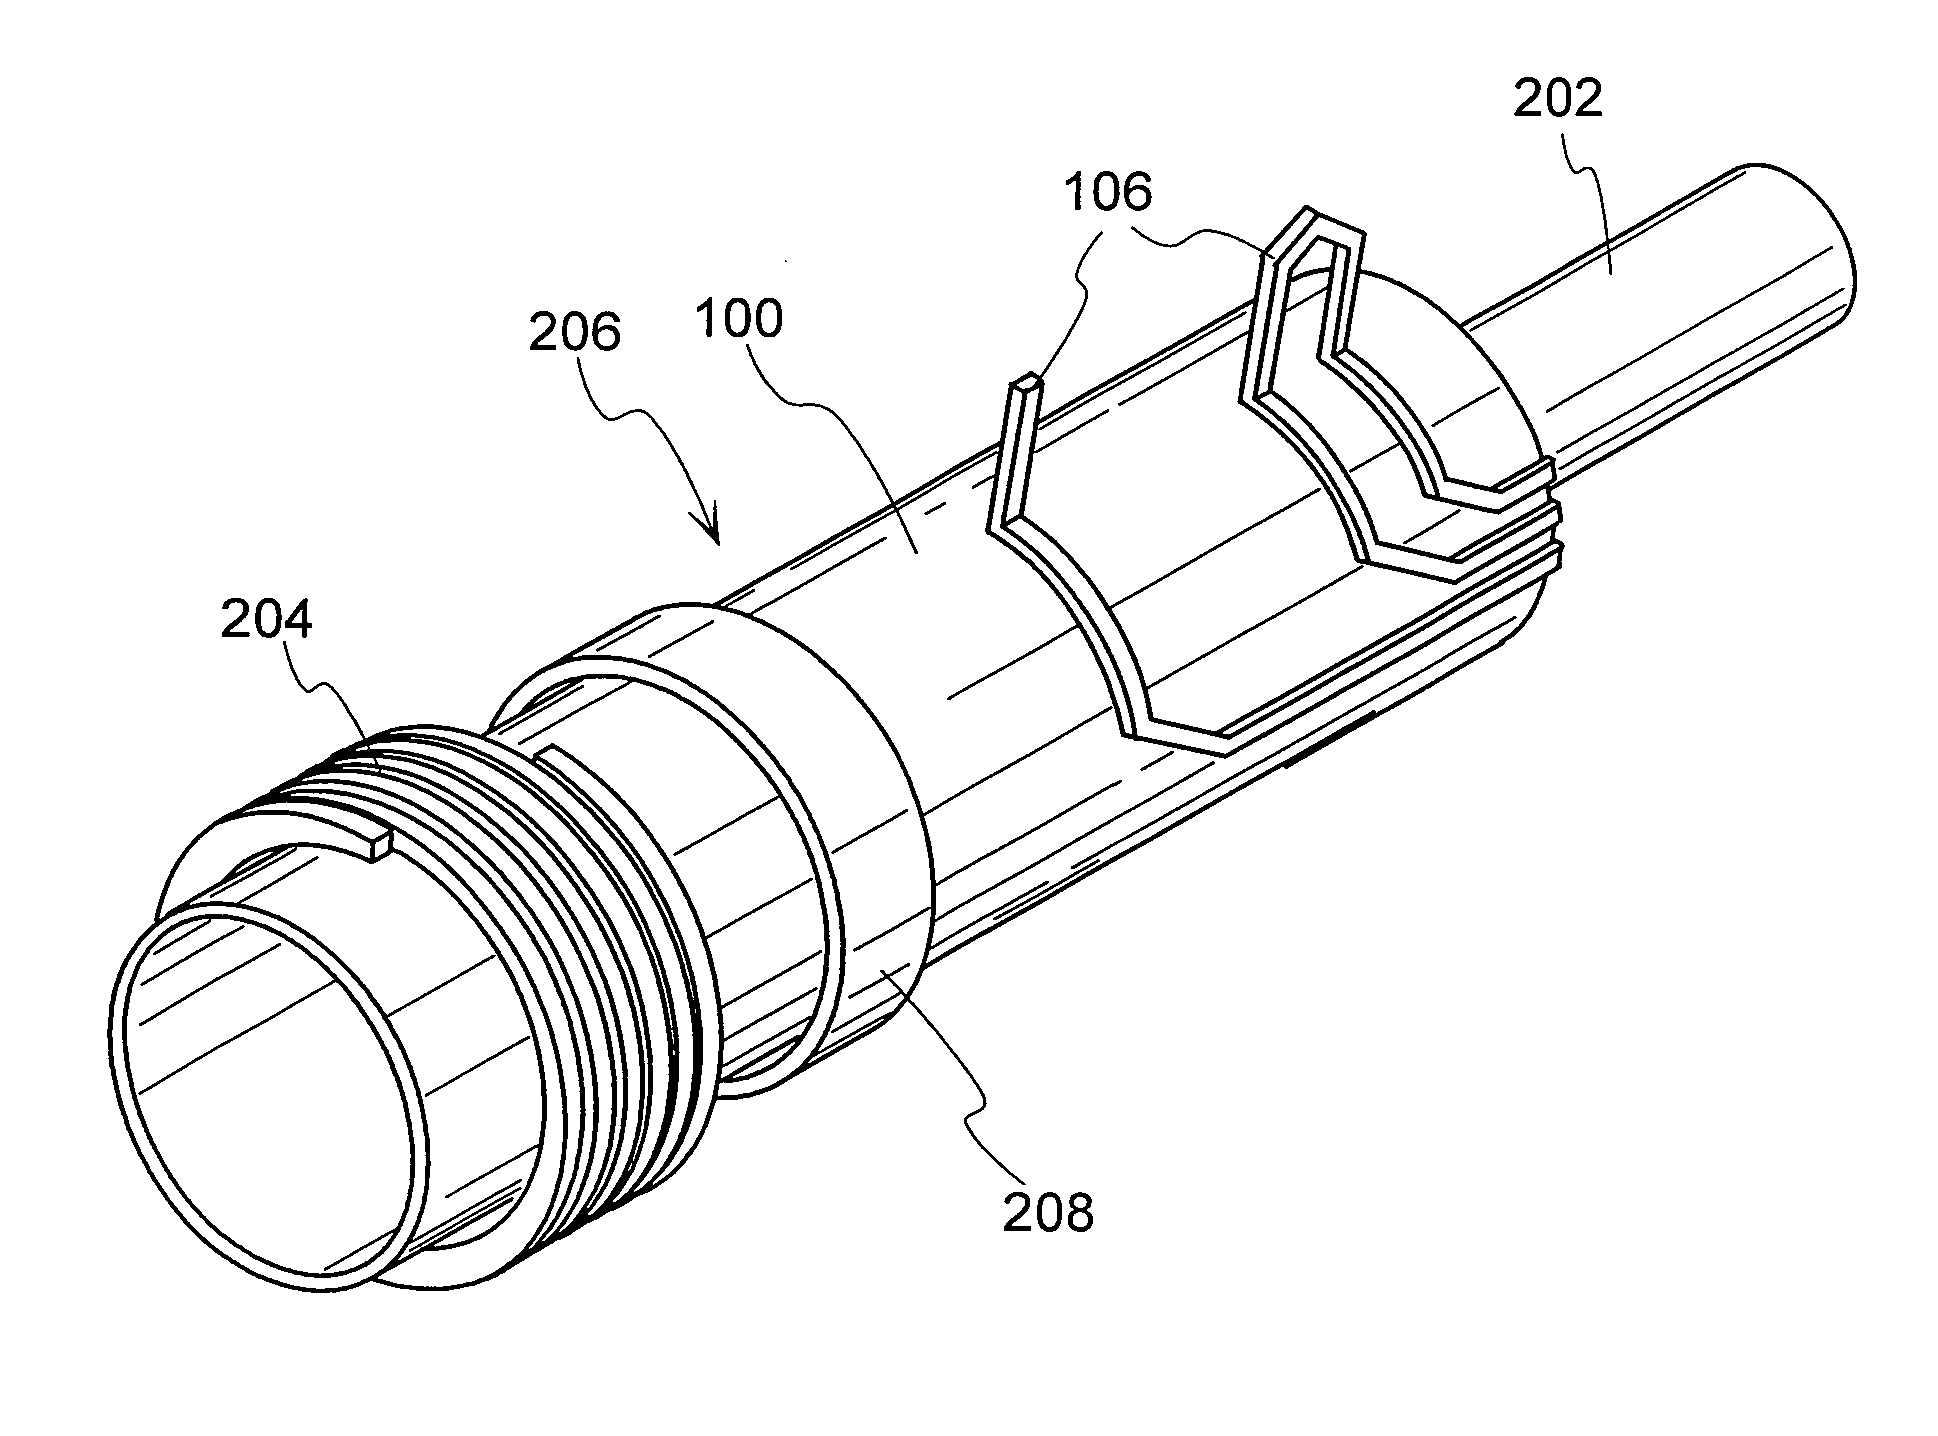 System and Method for Performing Ablation and Other Medical Procedures Using An Electrode Array with Flexible Circuit